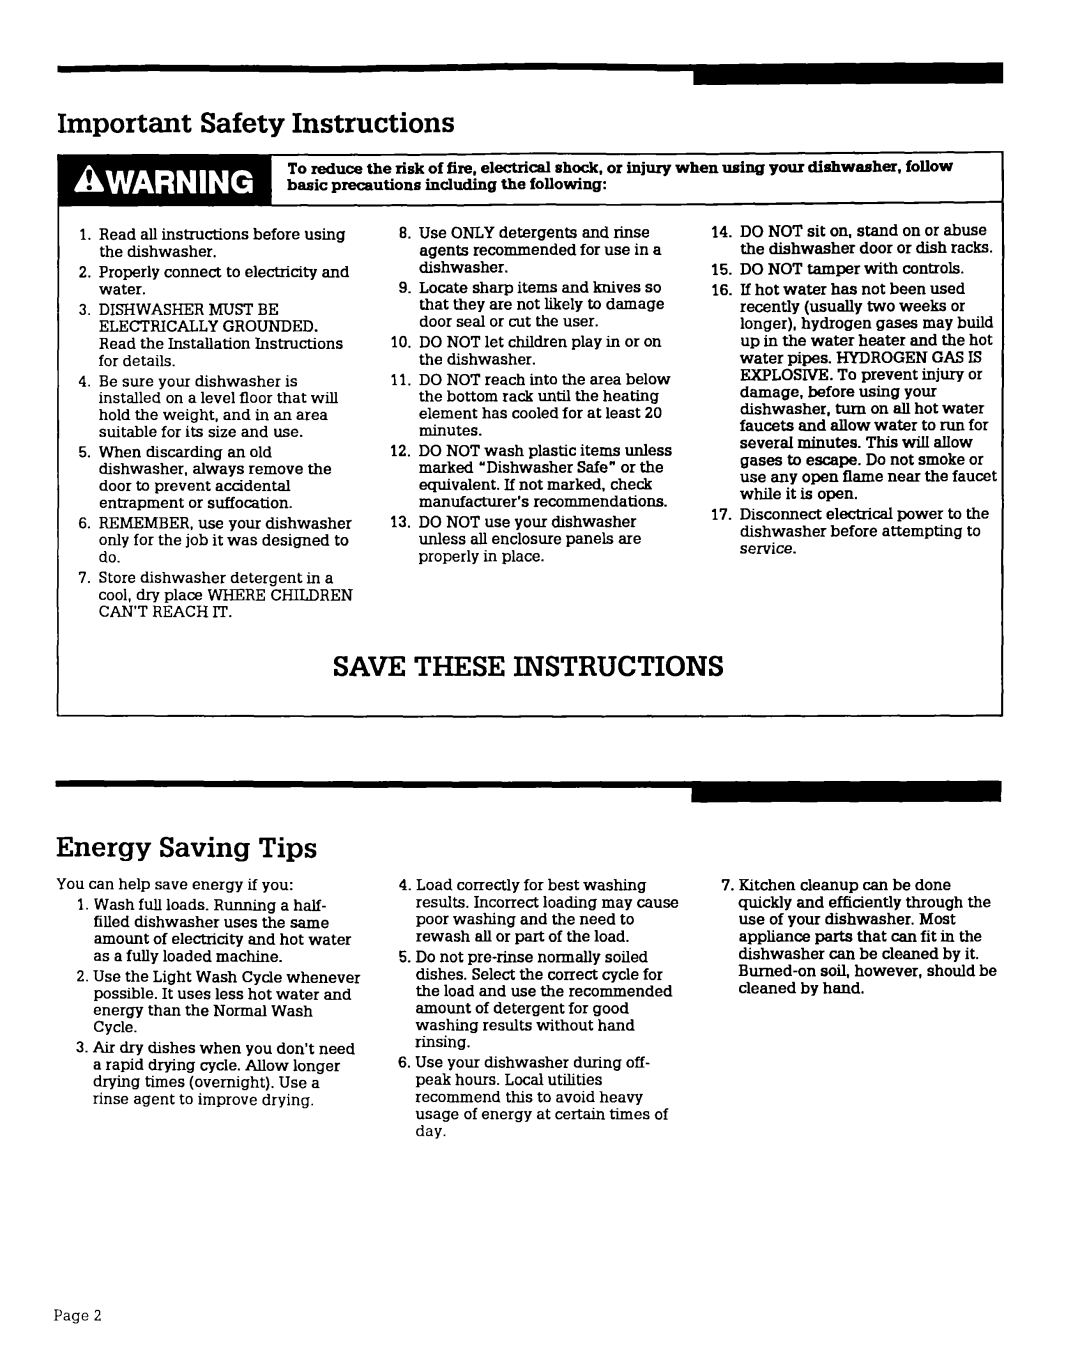 Whirlpool WU3OOOX warranty Important Safety Instructions, SAVE THESE INSTRUCTIONS Energy Saving Tips 